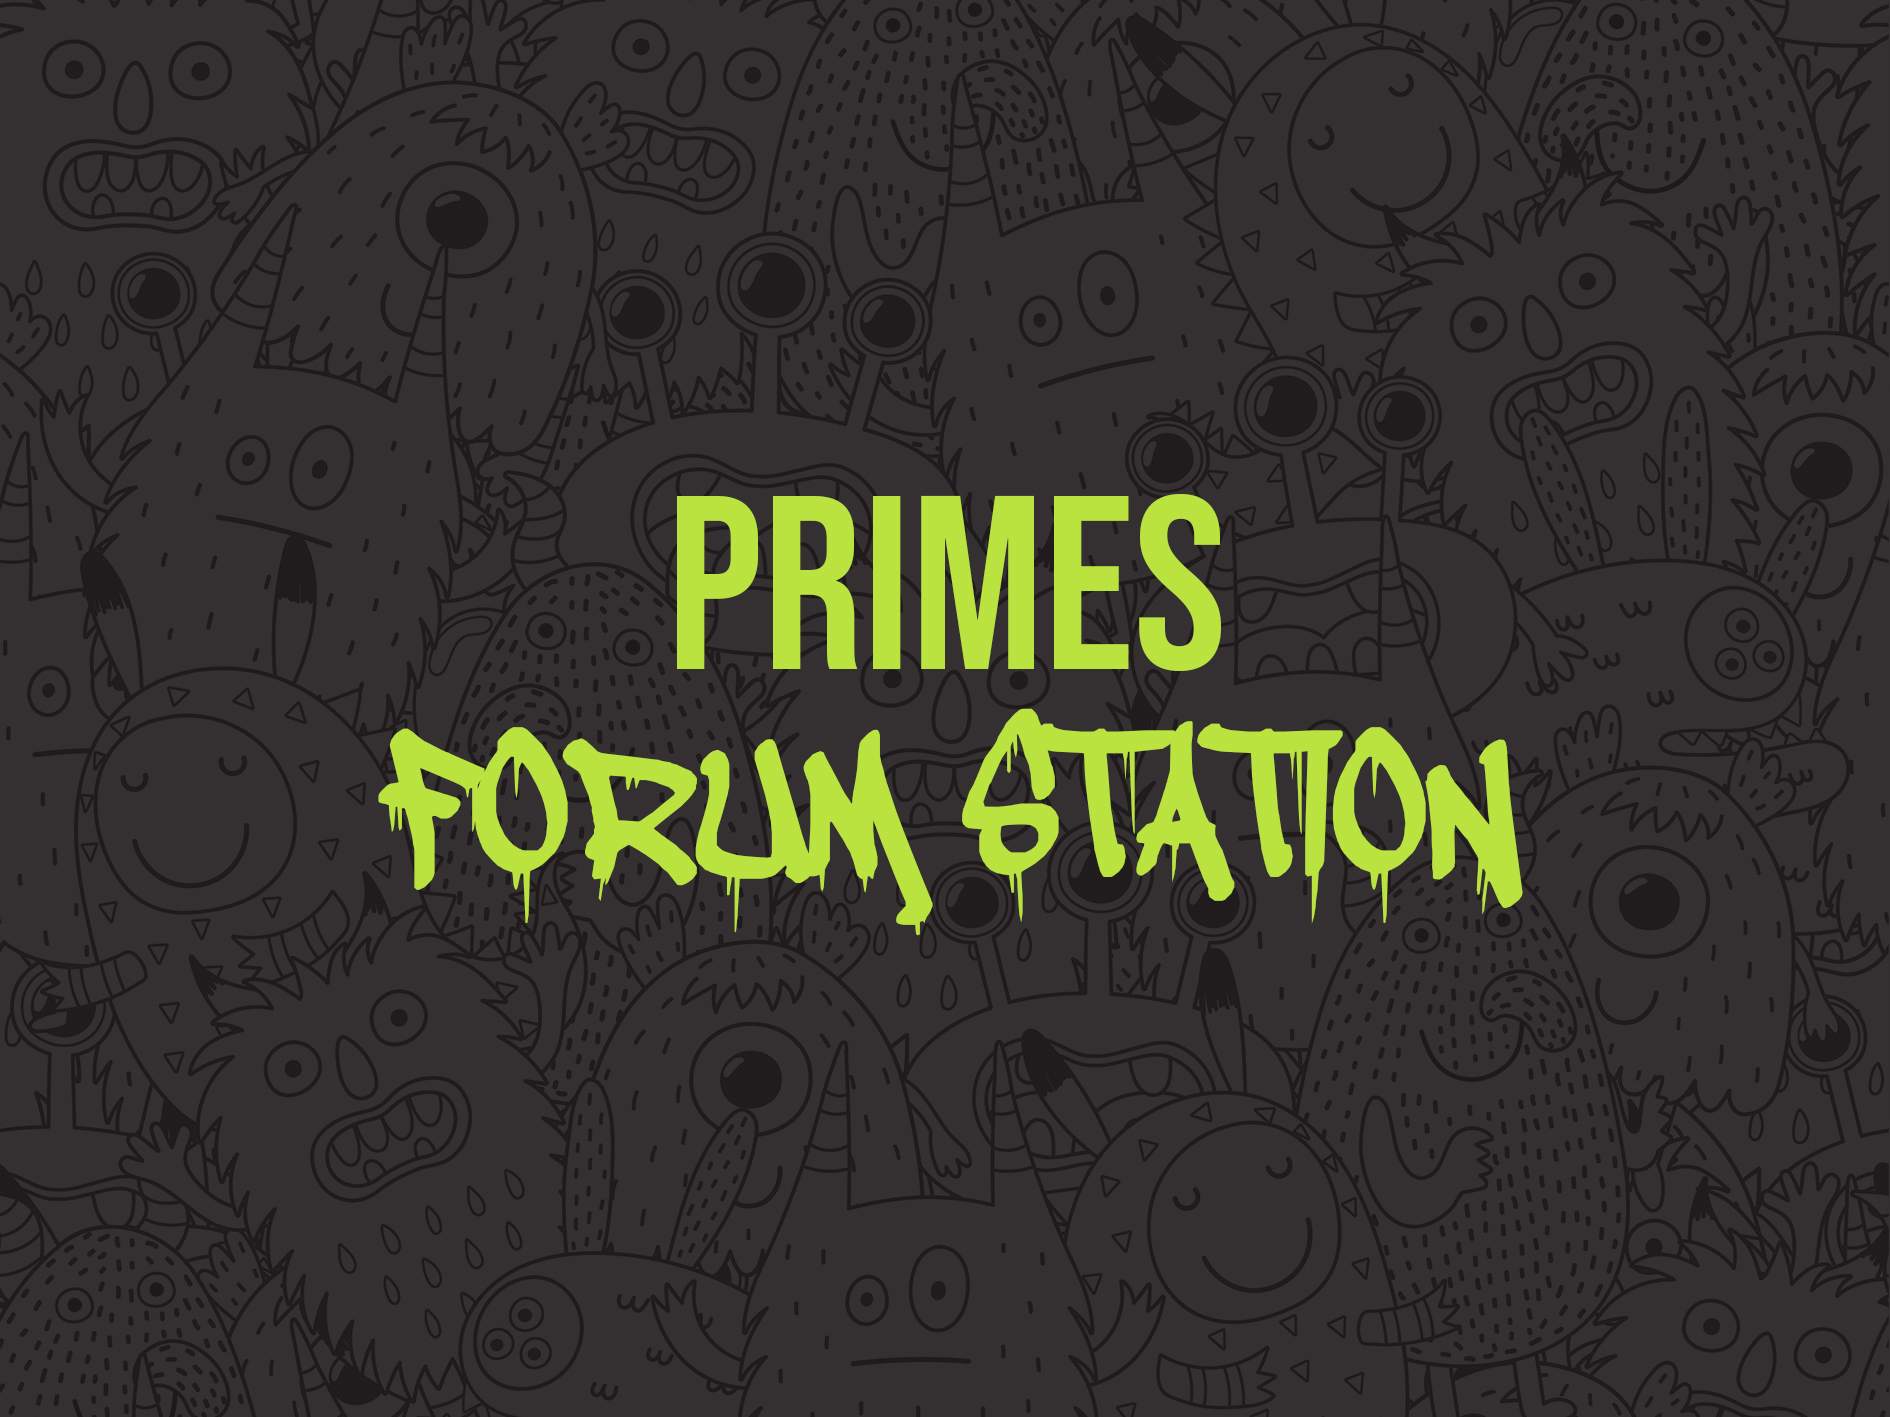 PRIMES at Forum Station(Black Bus) *Free Tickets - Limited Capacity - Página frontal